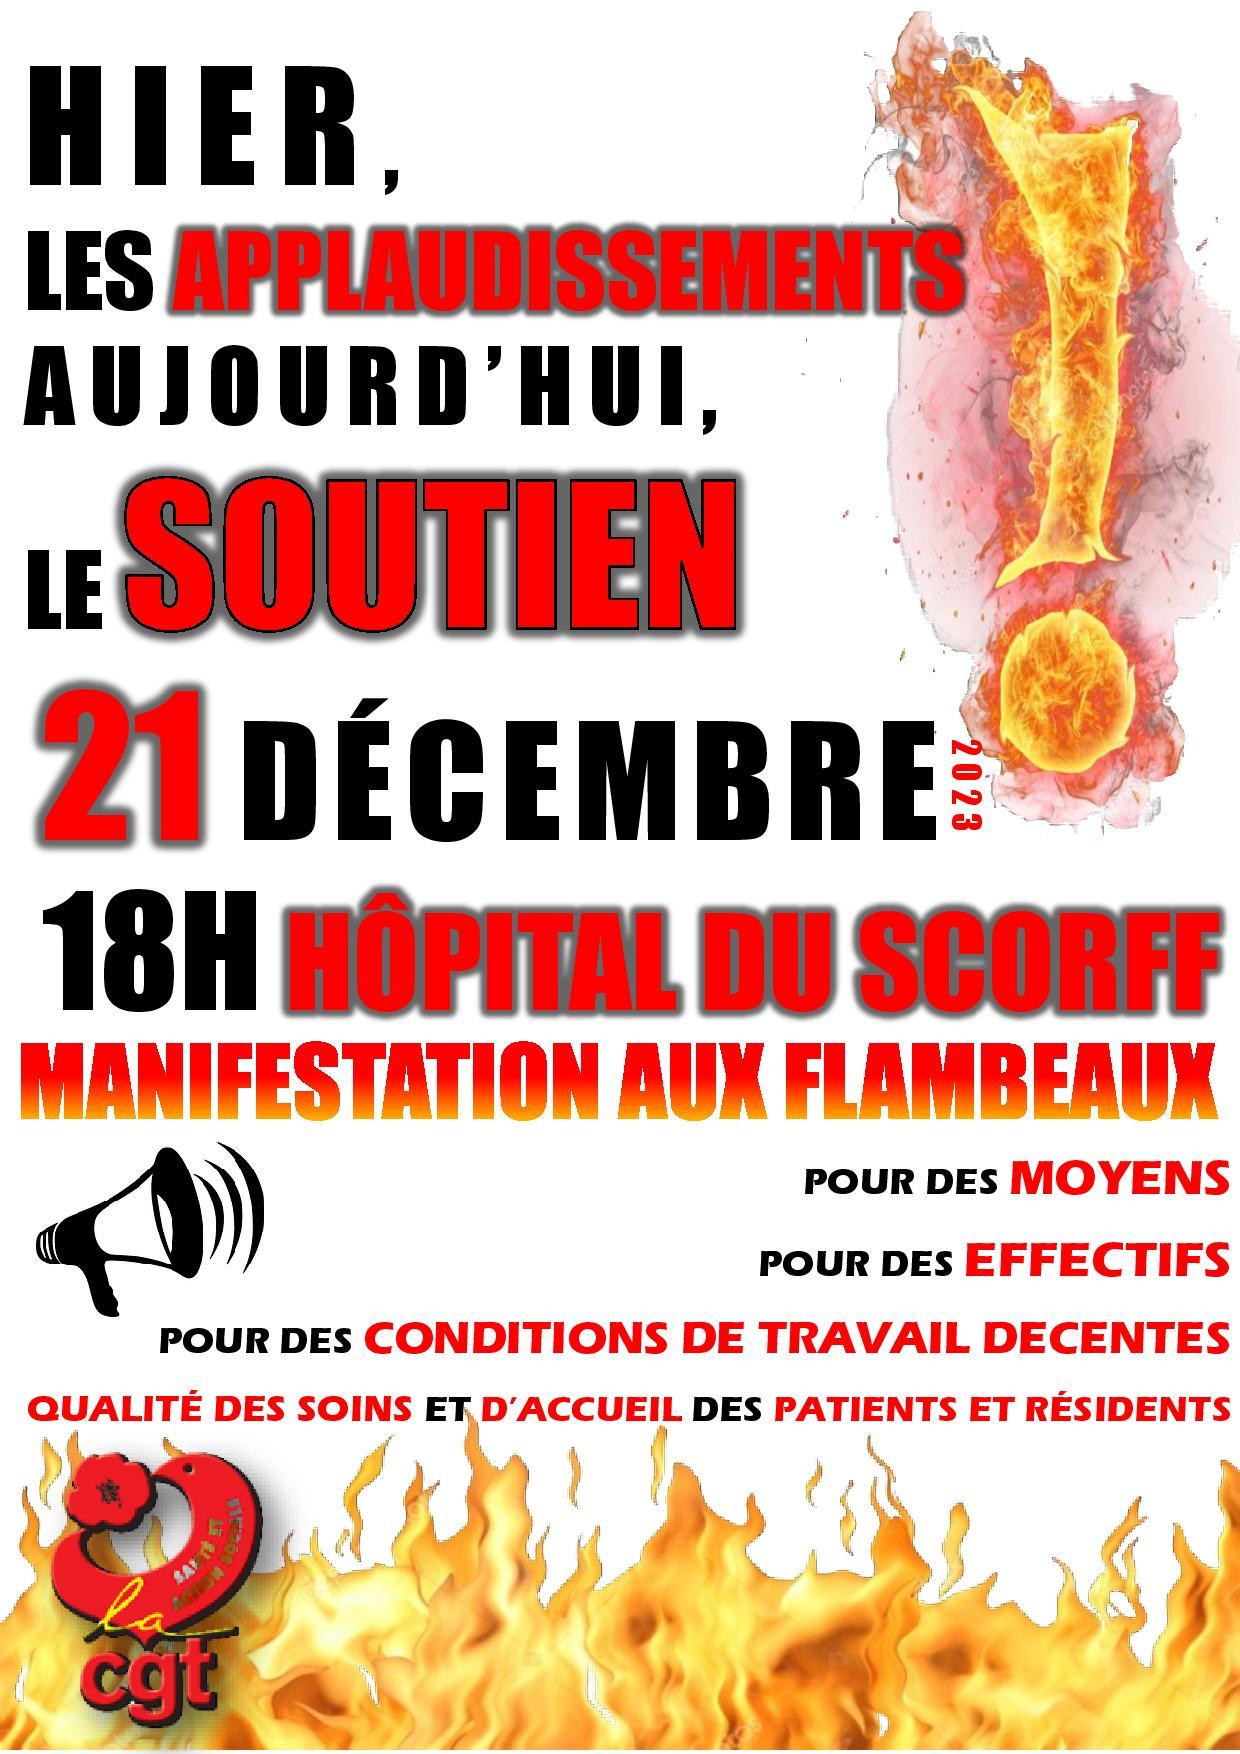 13122023 tract cgt manif flambeaux 21 12 2023 page 001 1 